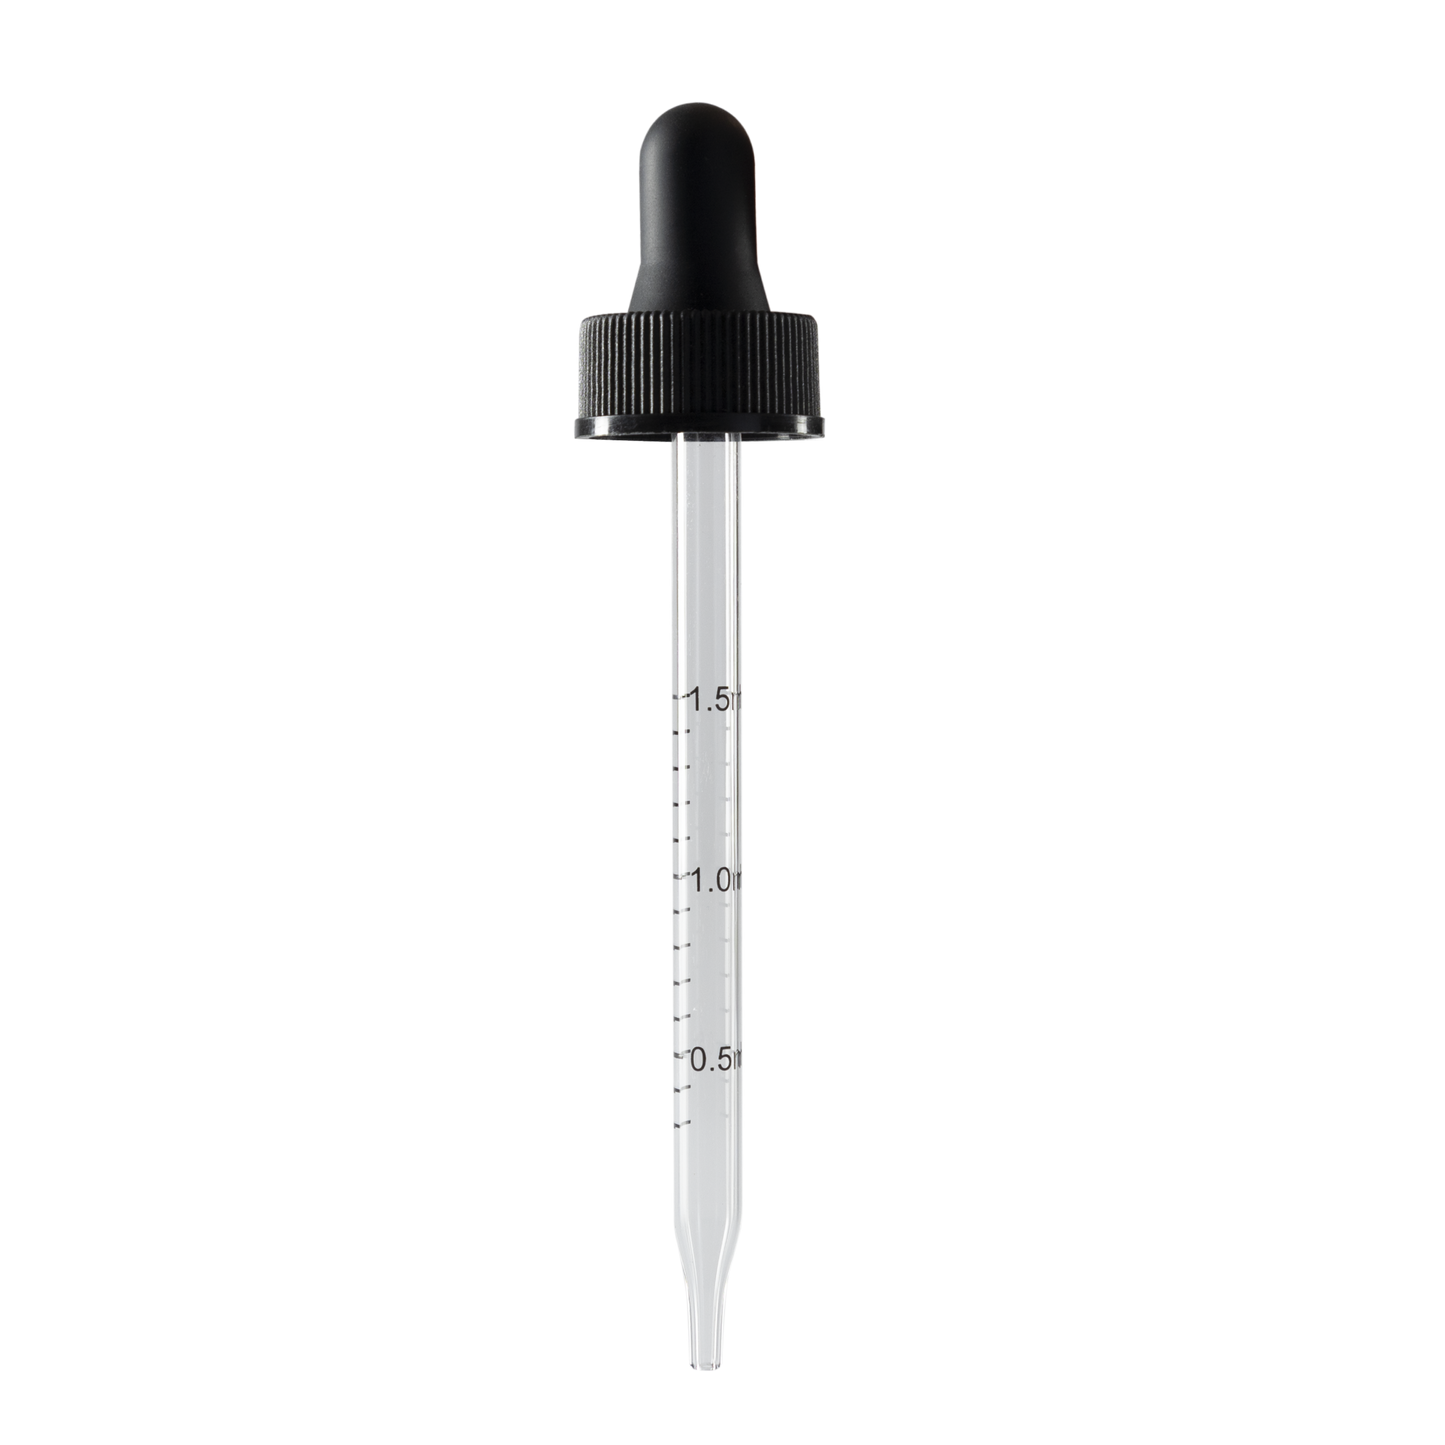 4 oz black glass dropper is perfect for filling up tiny bottles and vials with a small amount of liquid.